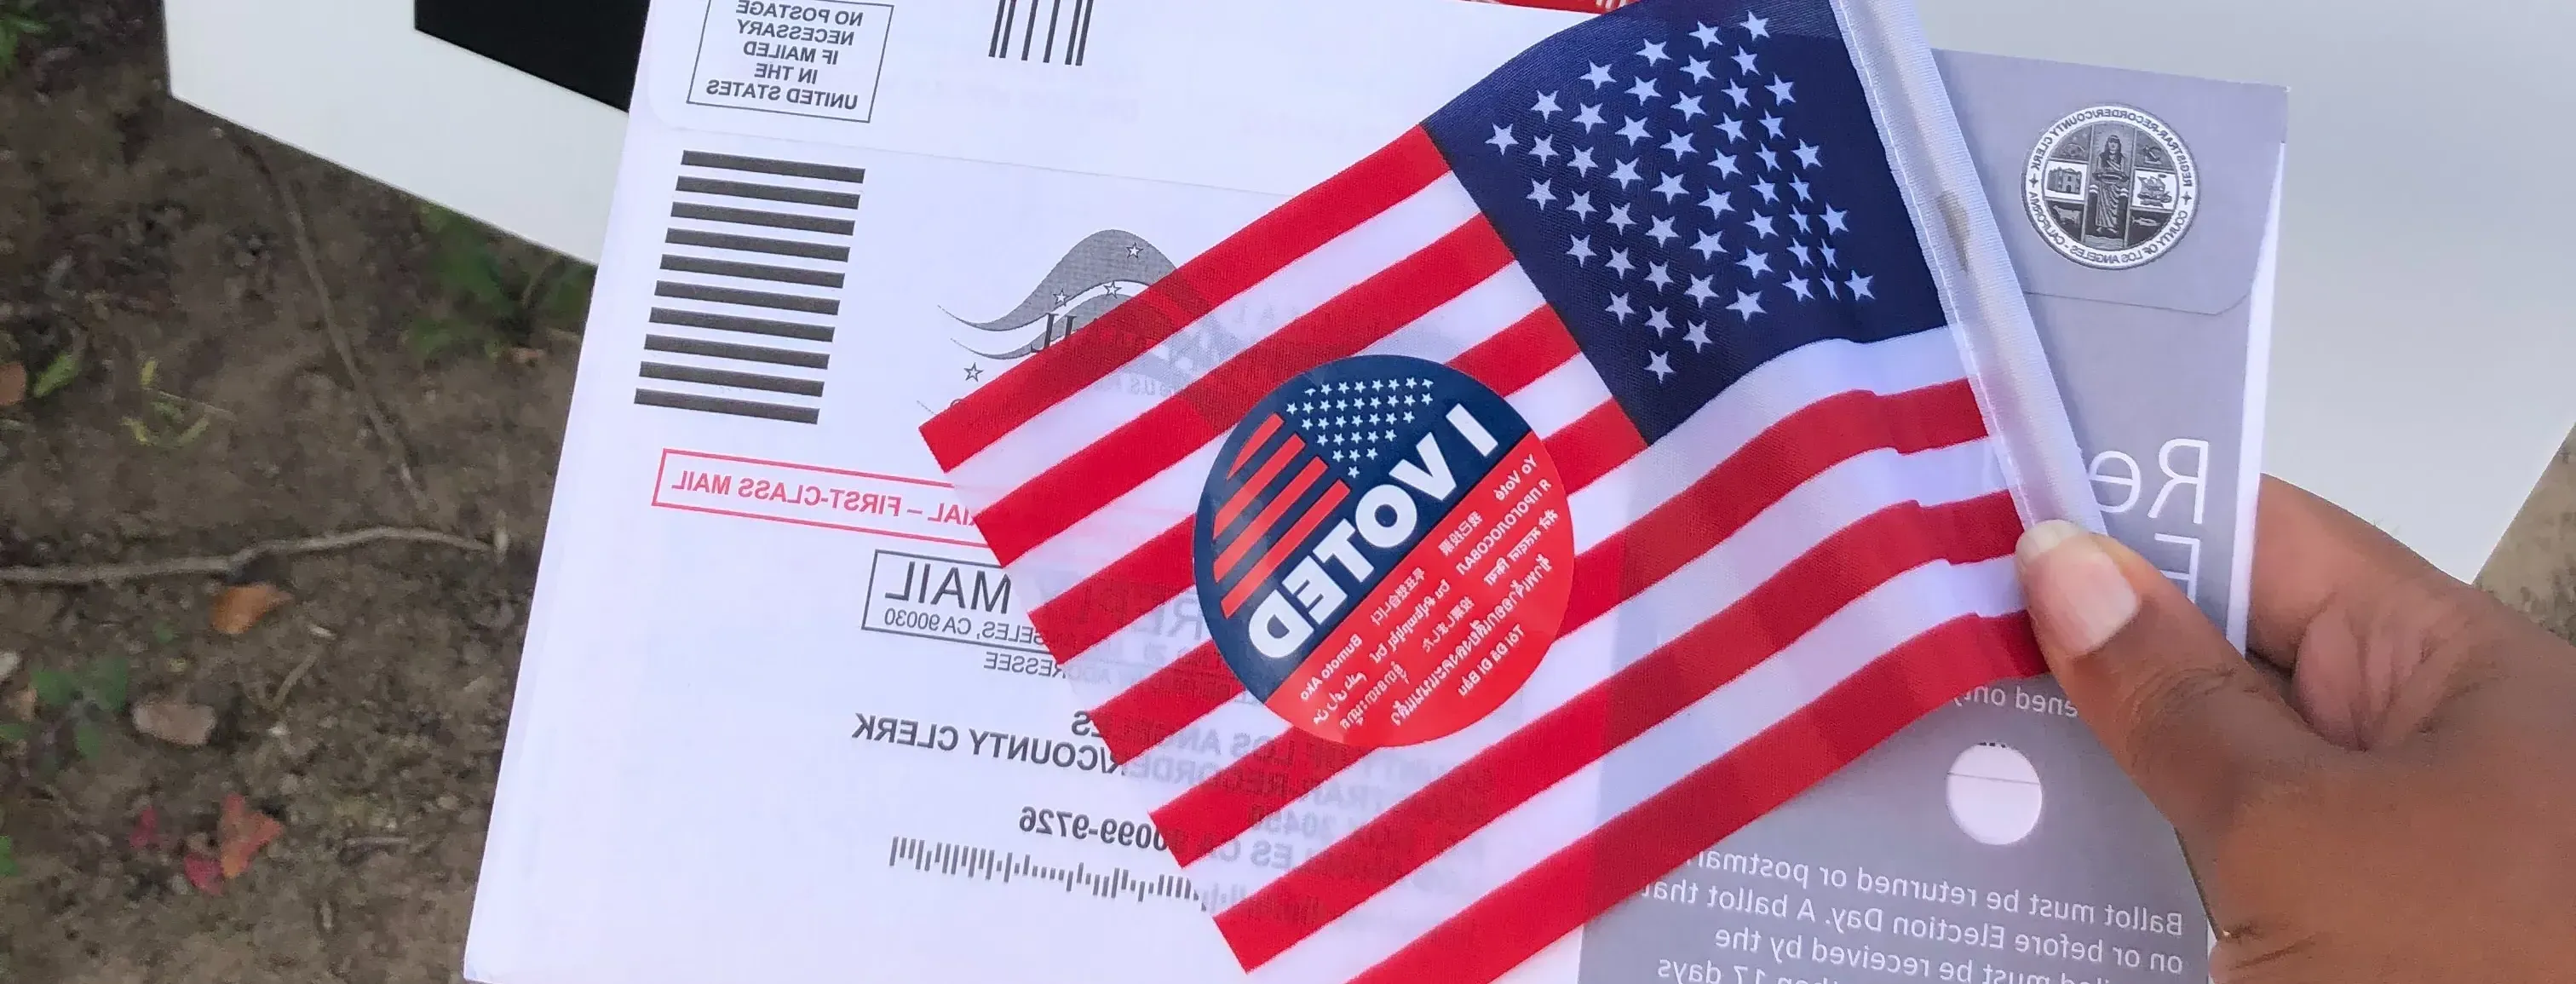 A person holds up an "I Voted" sticker, along with their ballot.